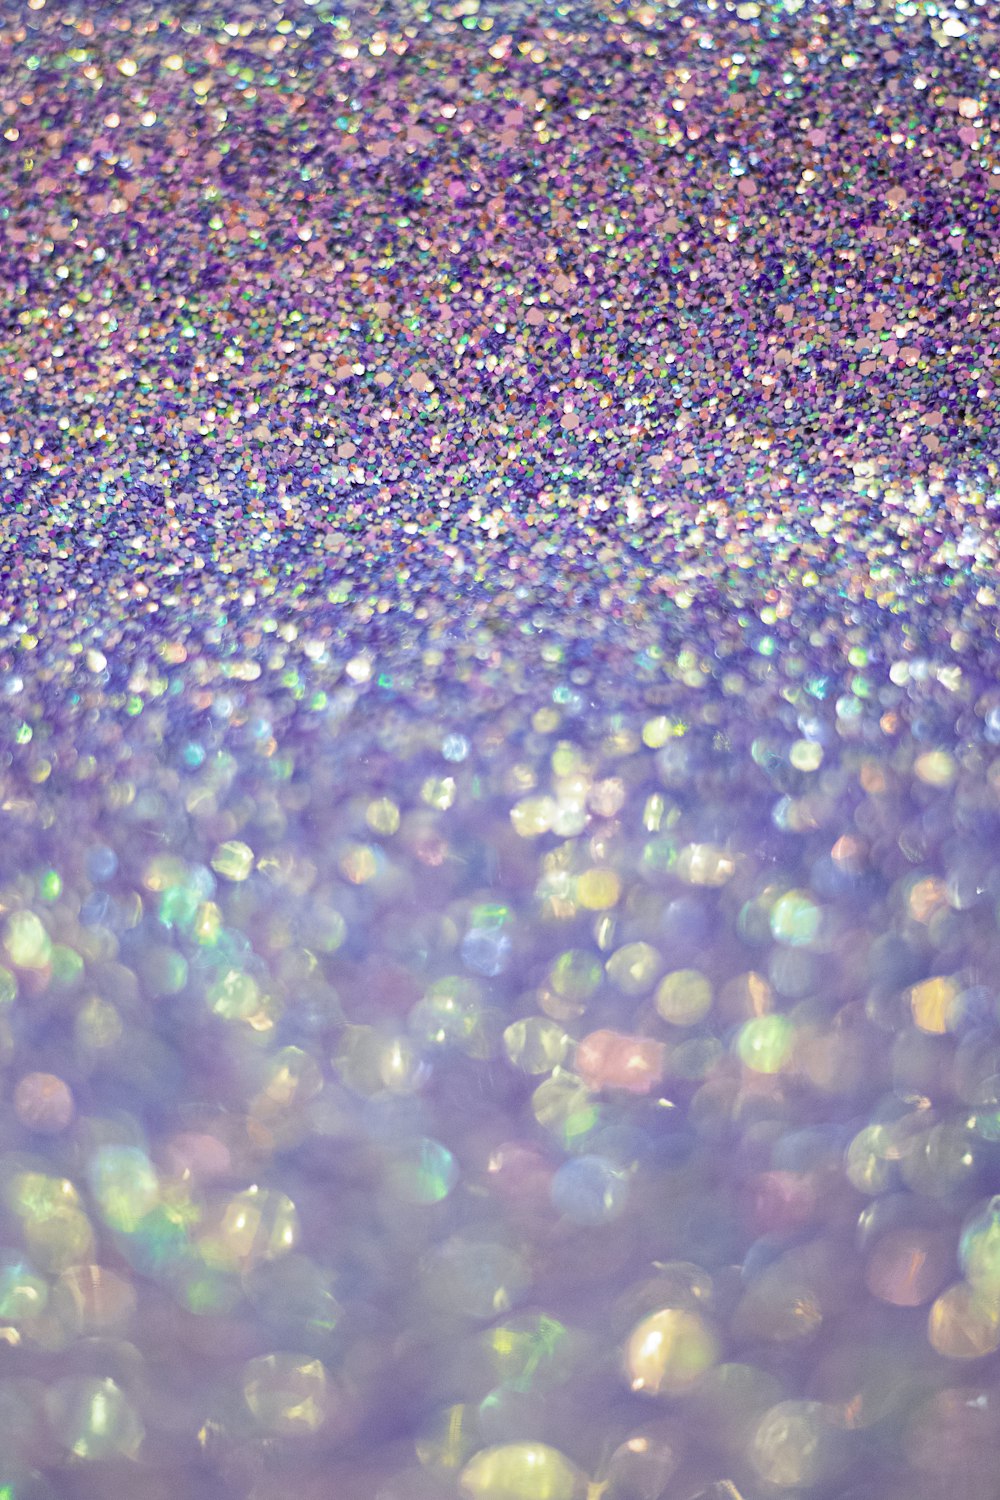 Purple Glitter Pictures  Download Free Images on Unsplash